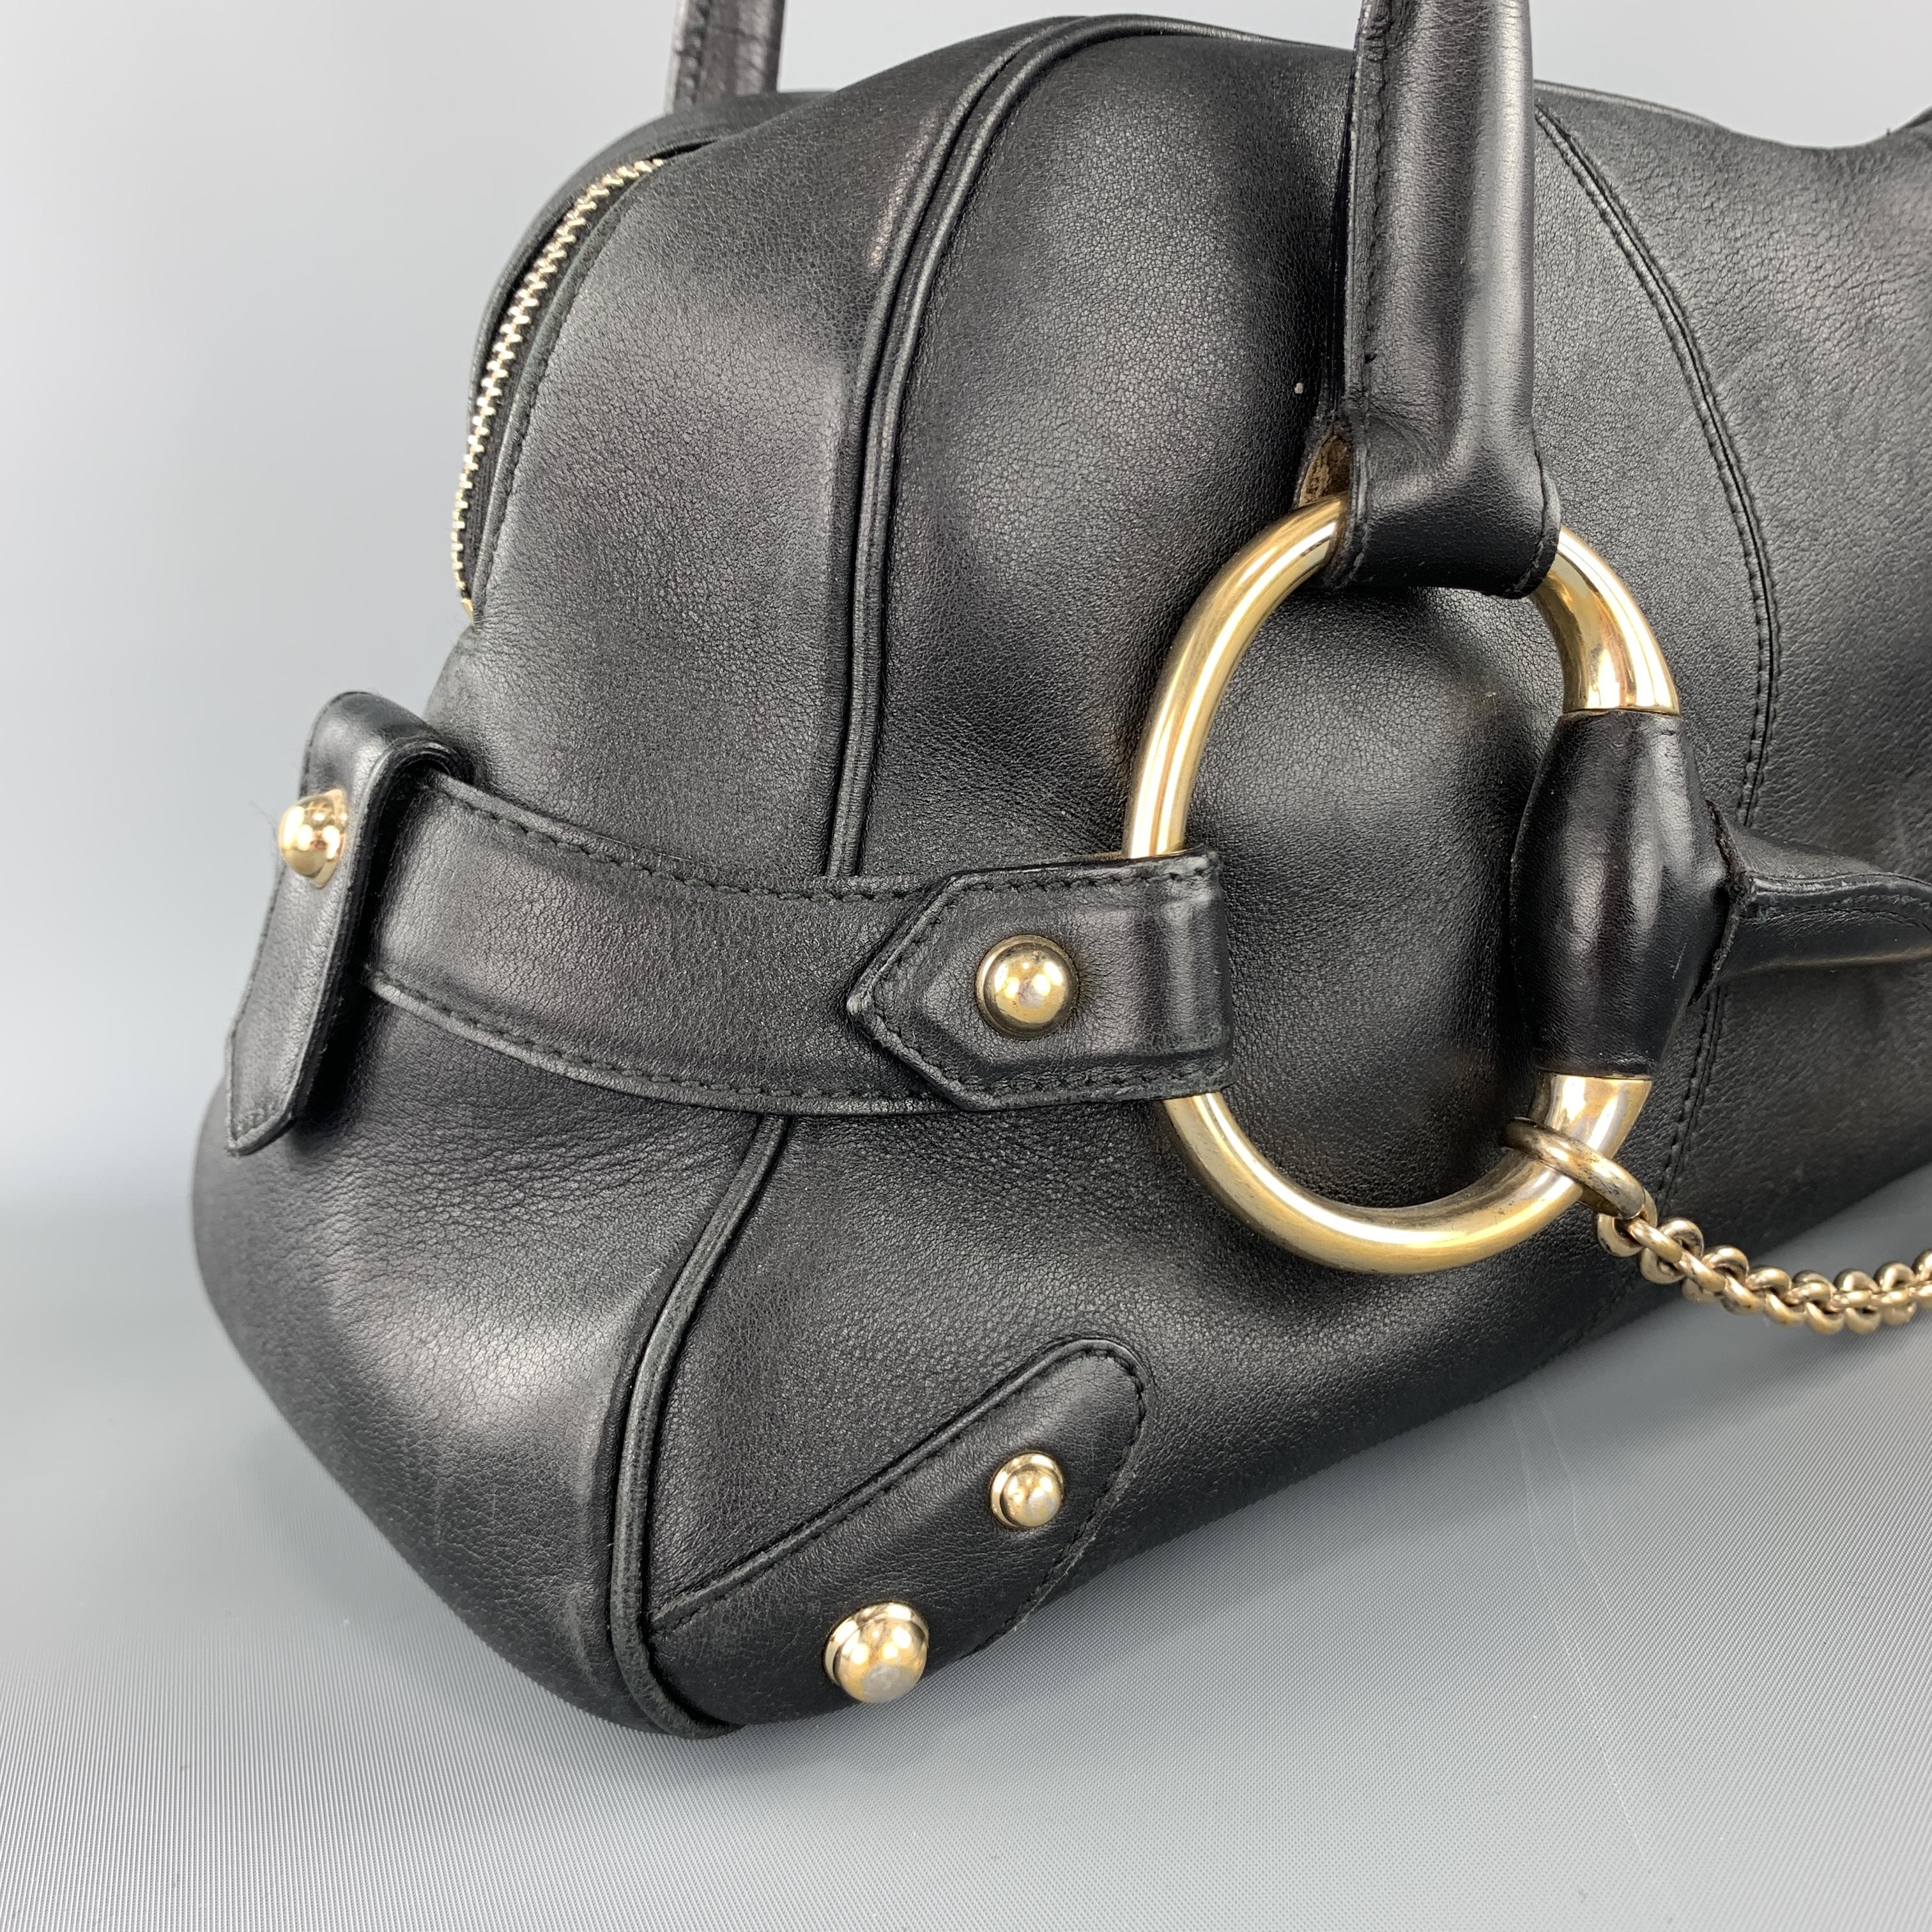 Archive GUCCI shoulder bag comes in black leather with gold tone hardware throughout, double rolled top straps, zip top closure, and oversized horsebit with chain. Made in Italy.

Good Pre-Owned Condition.

Measurements:

Length: 16 in.
Width: 6